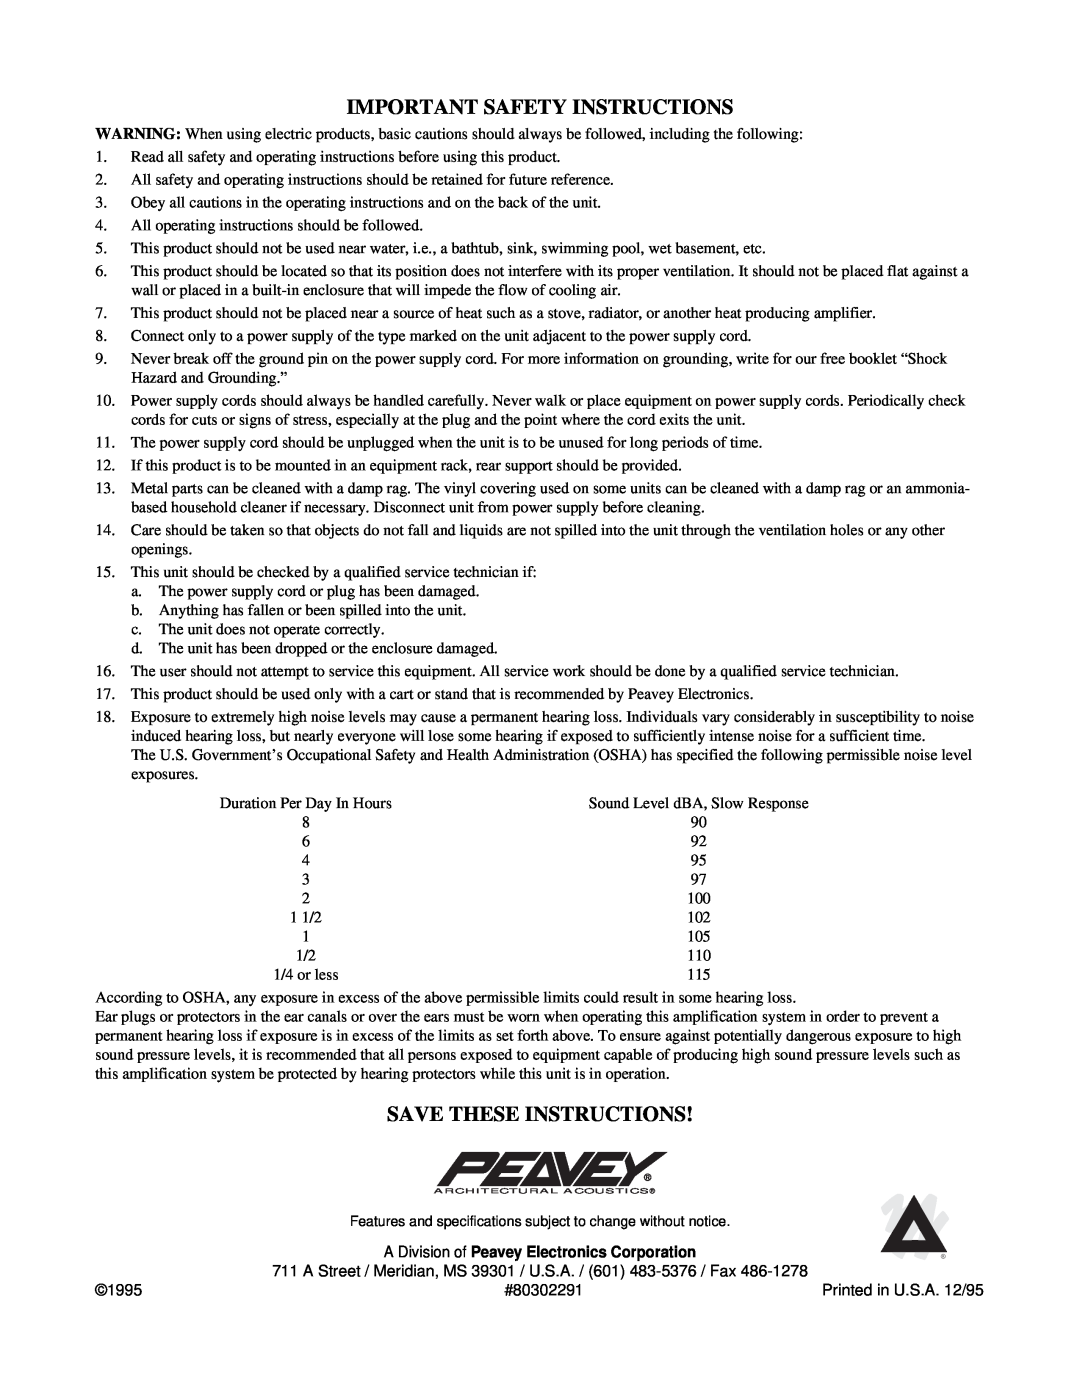 Peavey IDC 150T II manual Important Safety Instructions, Save These Instructions 